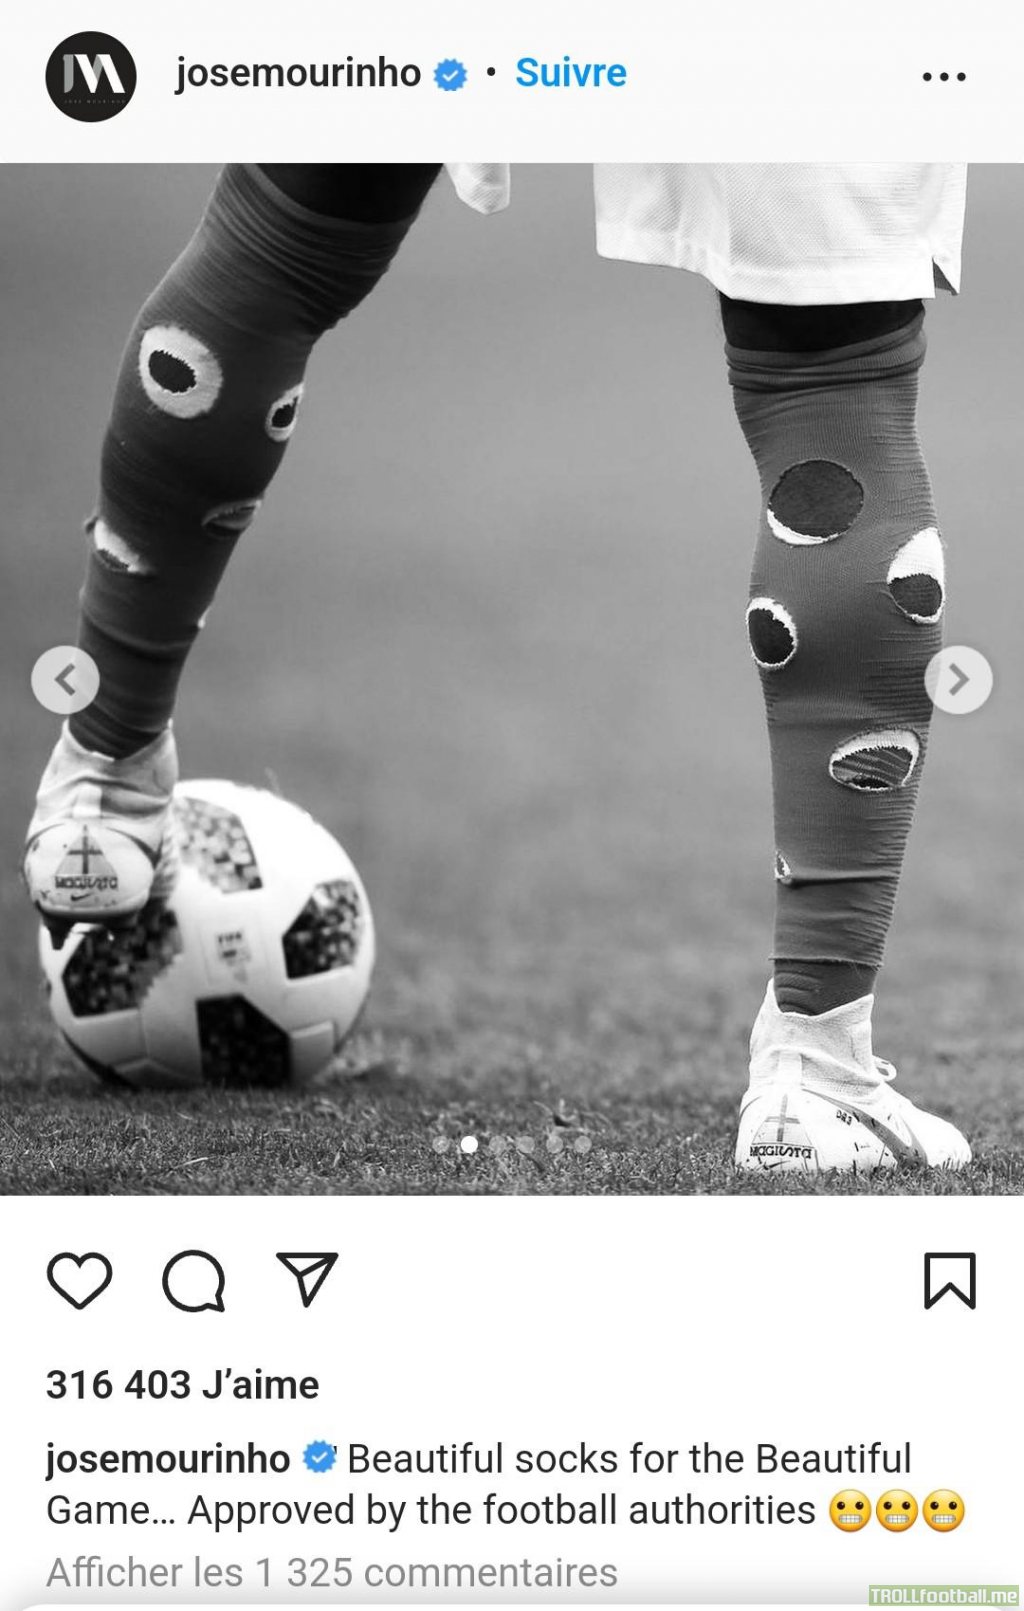 Jose Mourinho on Instagram "Beautiful socks for the Beautiful Game… Approved by the football authorities"